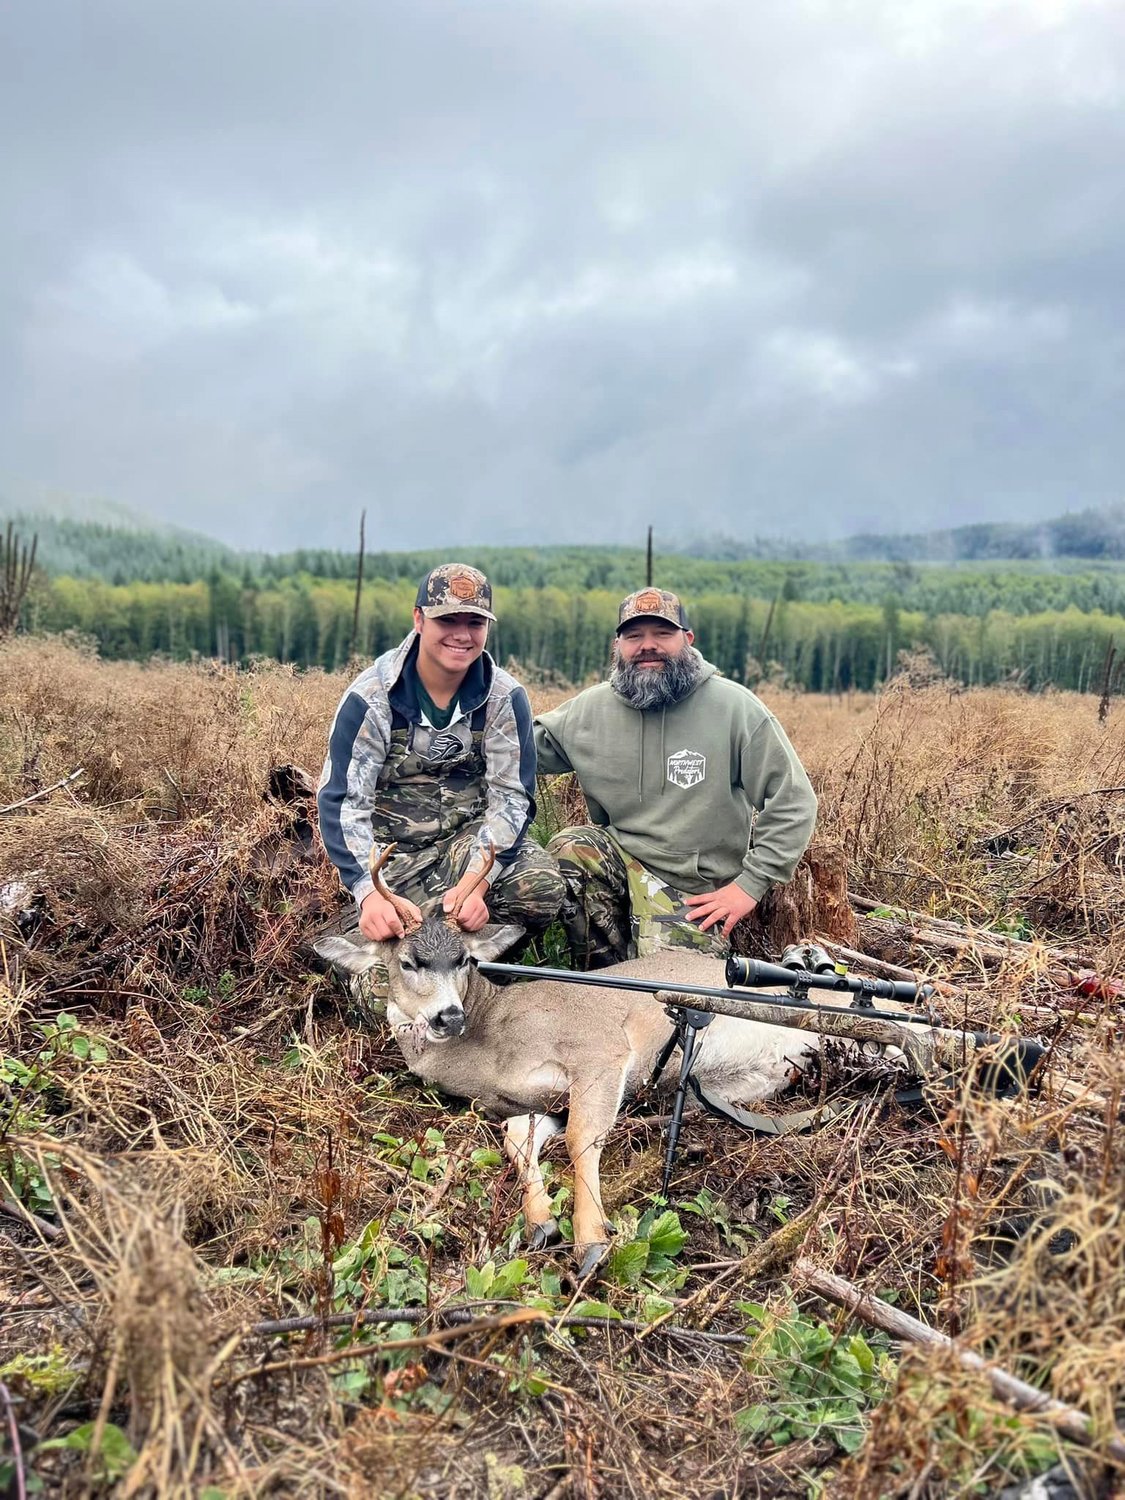 "Having wild game in our freezer is a family tradition and a blessing that we are tremendously thankful for here in the Gerard home. This photo is of Drayven Gerard, 16, left, and his dad Jayson Gerard with Drayven's first-ever buck! Harvested out of the Winston Creek area. These are some special times in the woods with your dad!" Submitted by Amber Gerard, of Silver Creek.